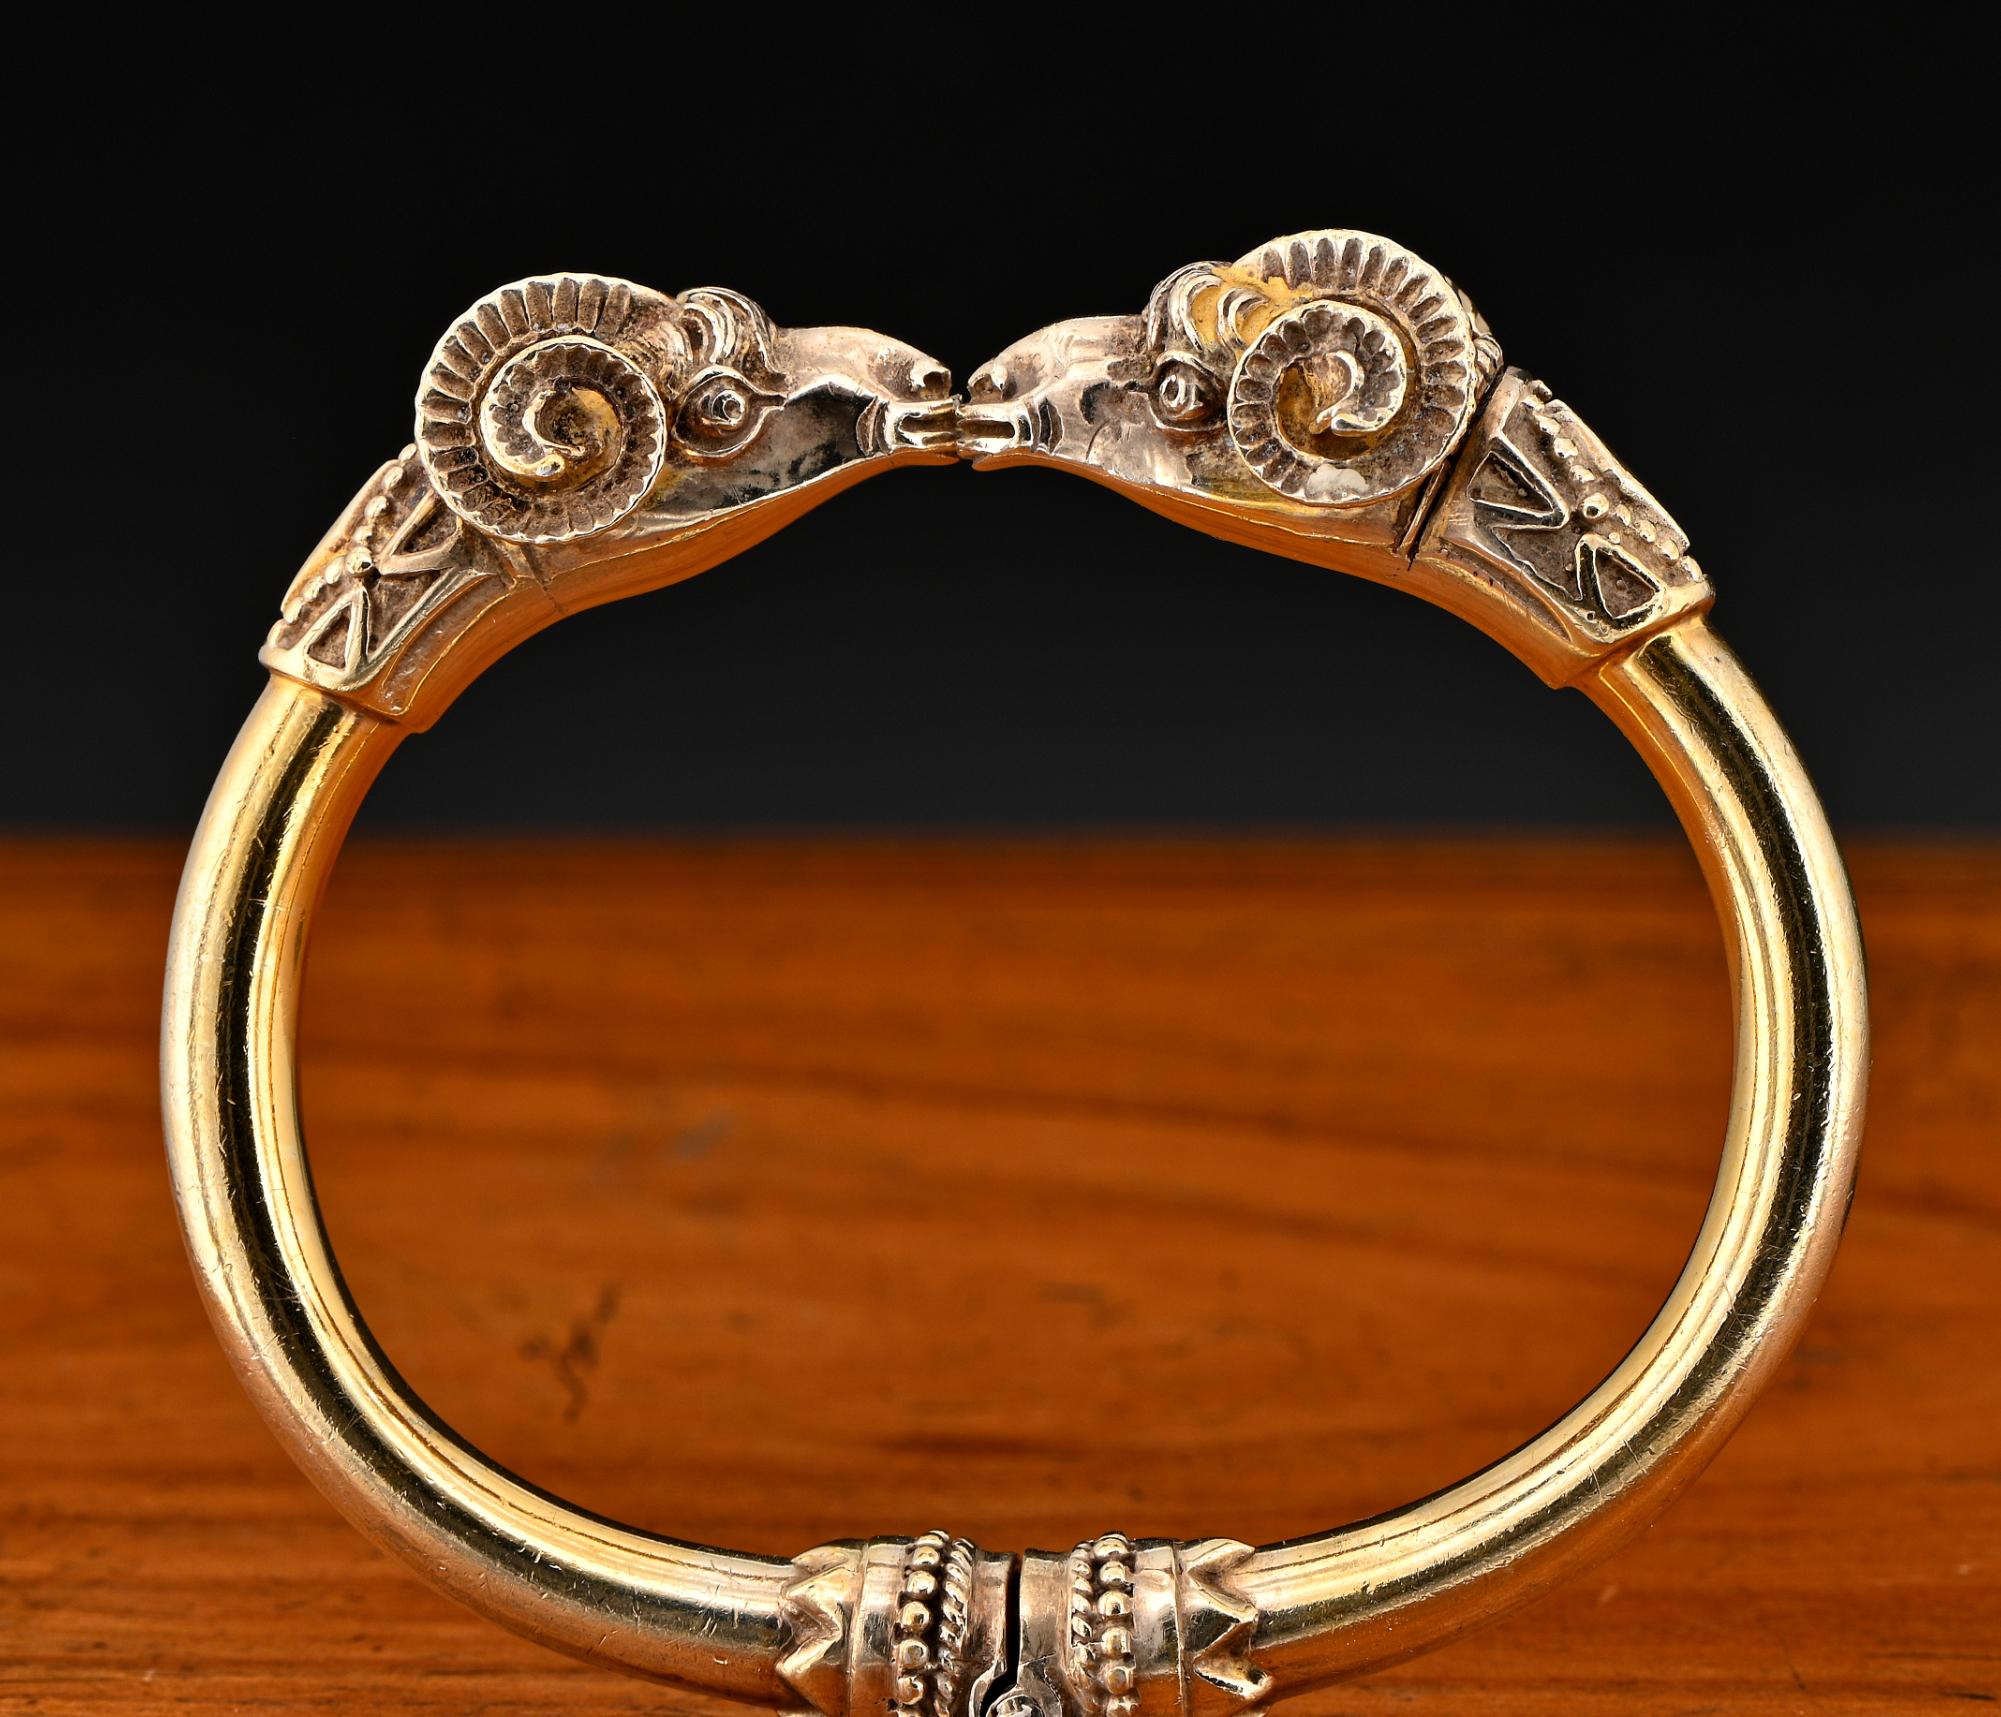 Past Marvels Revealed
This outstanding antique Ram’s head bangle is a fine representation of the Etruscan revival made during 1880 ca
It has been hand crafted of solid 18 KT gold with 50.00 grams weight
Superb realistically done, like the real ones,